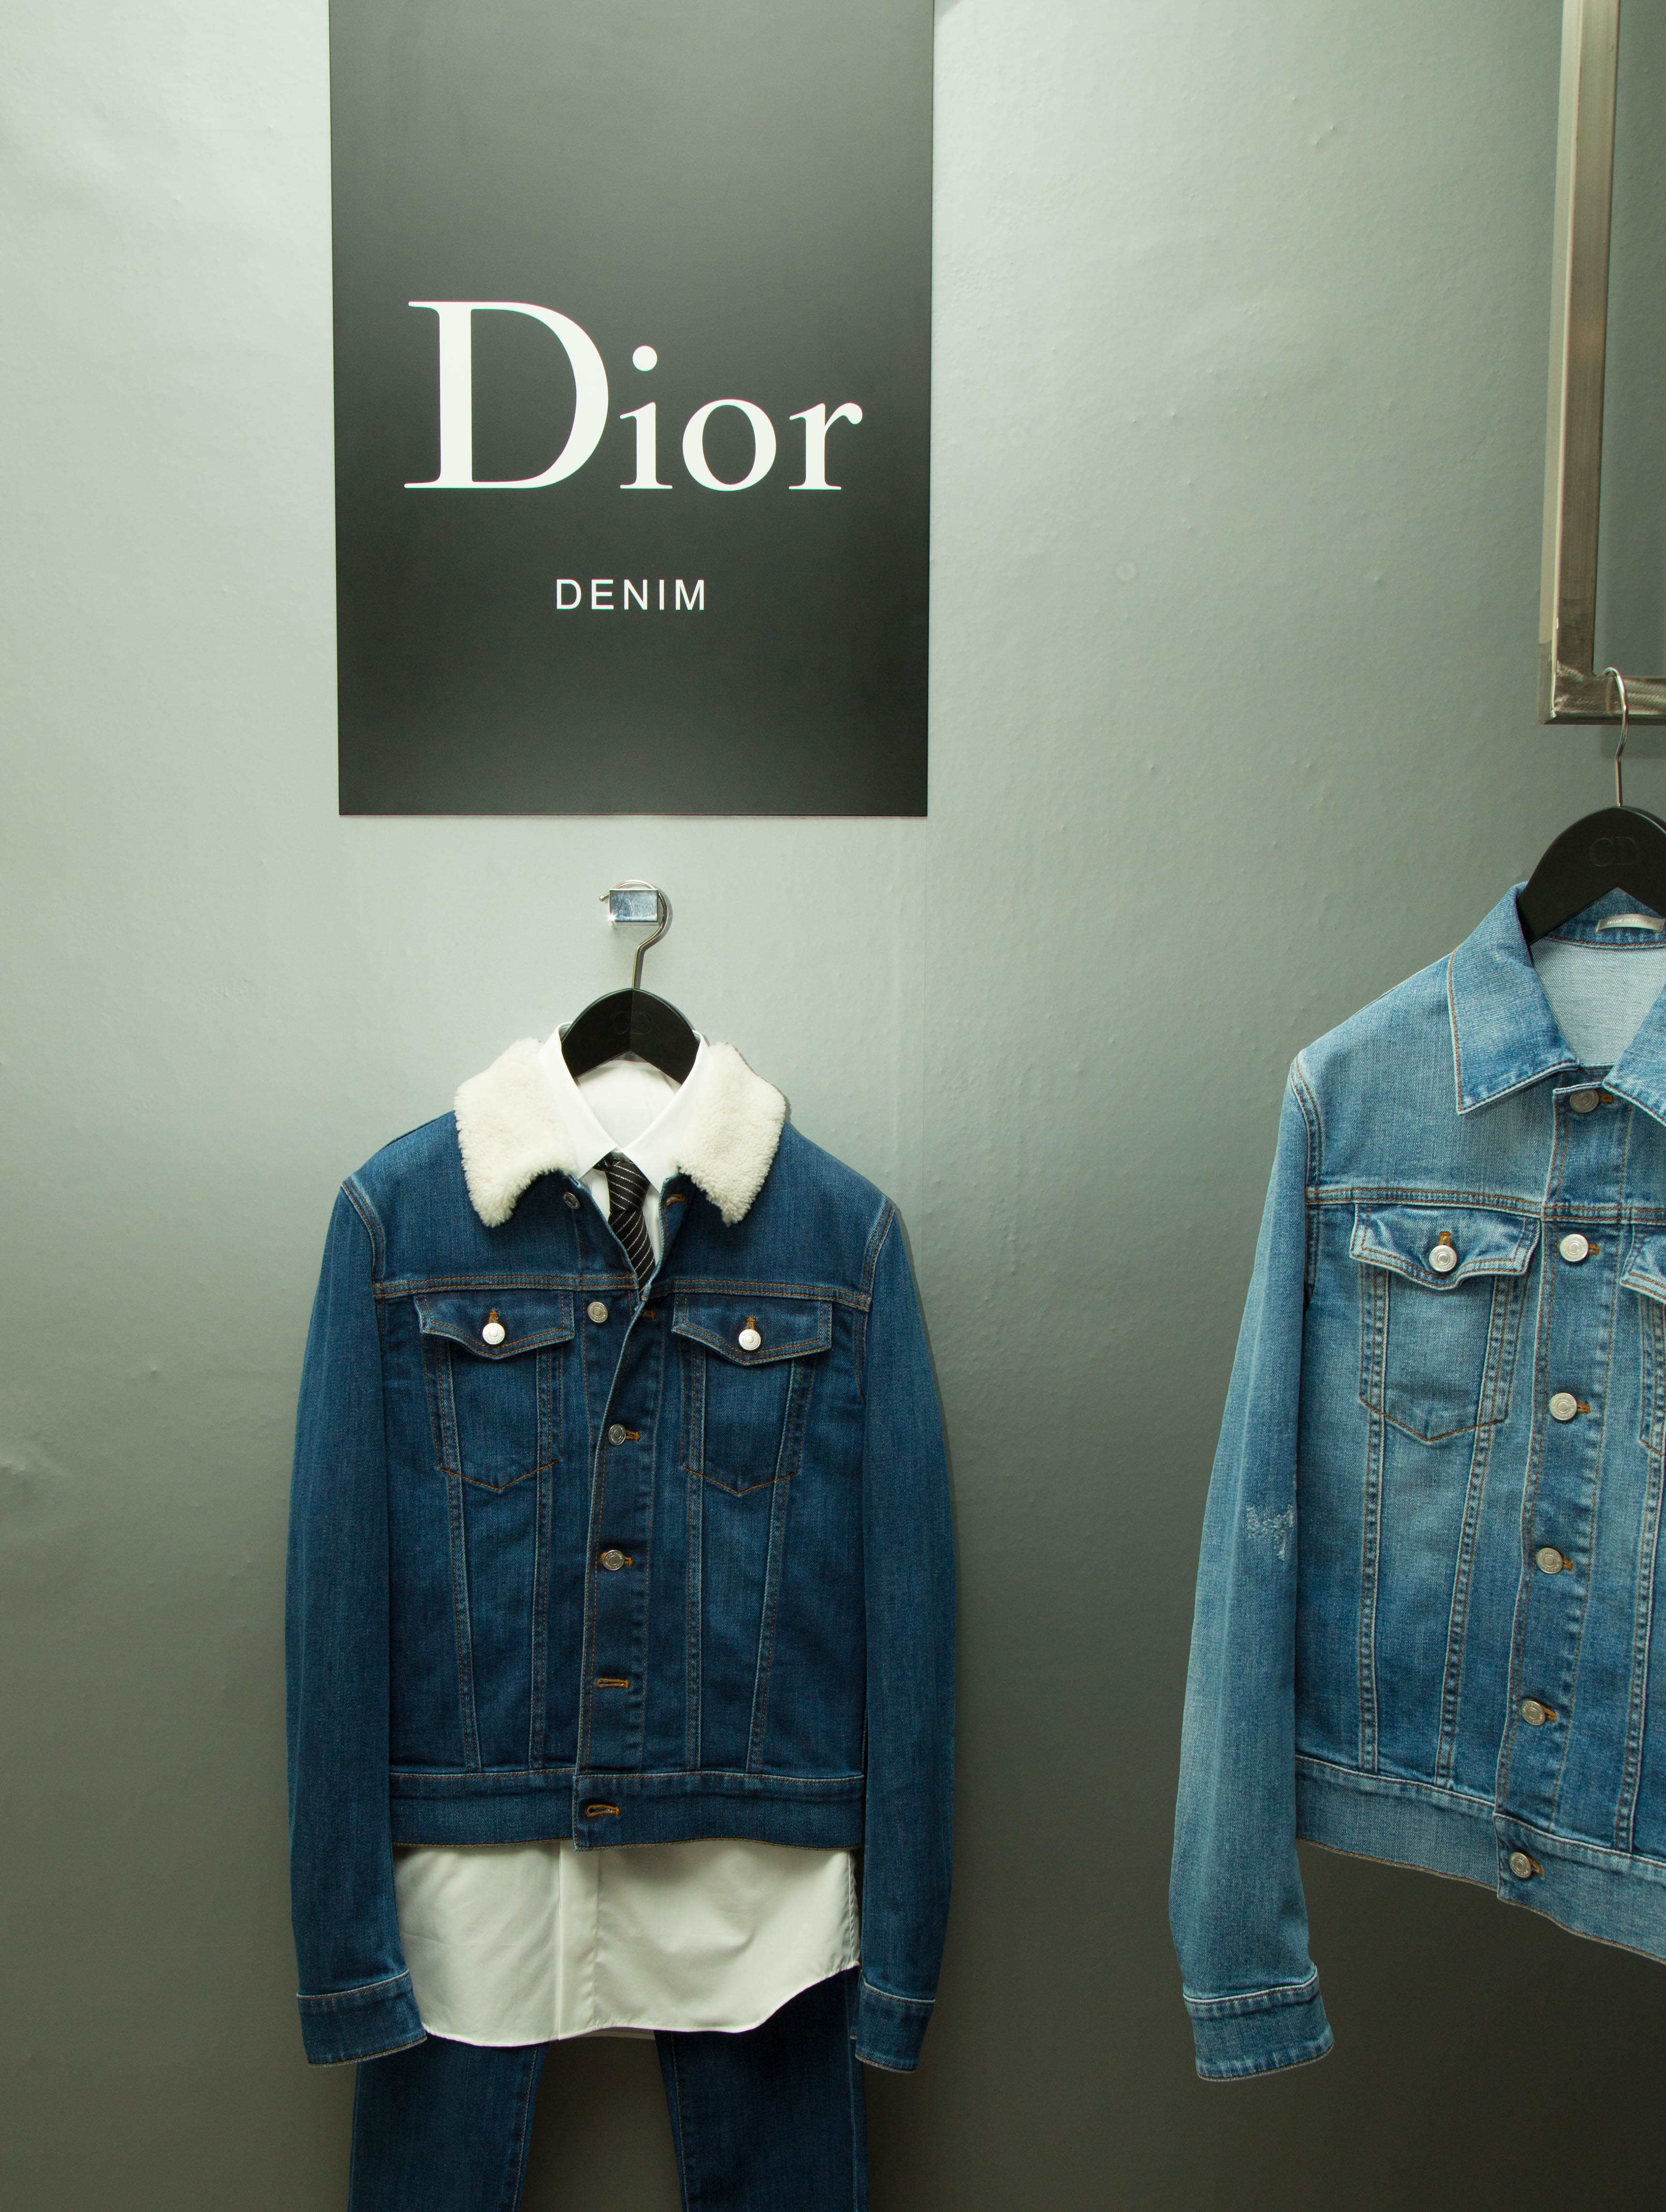 Kris Van Assche's Dior Homme Collection Takes Hollywood by Storm 